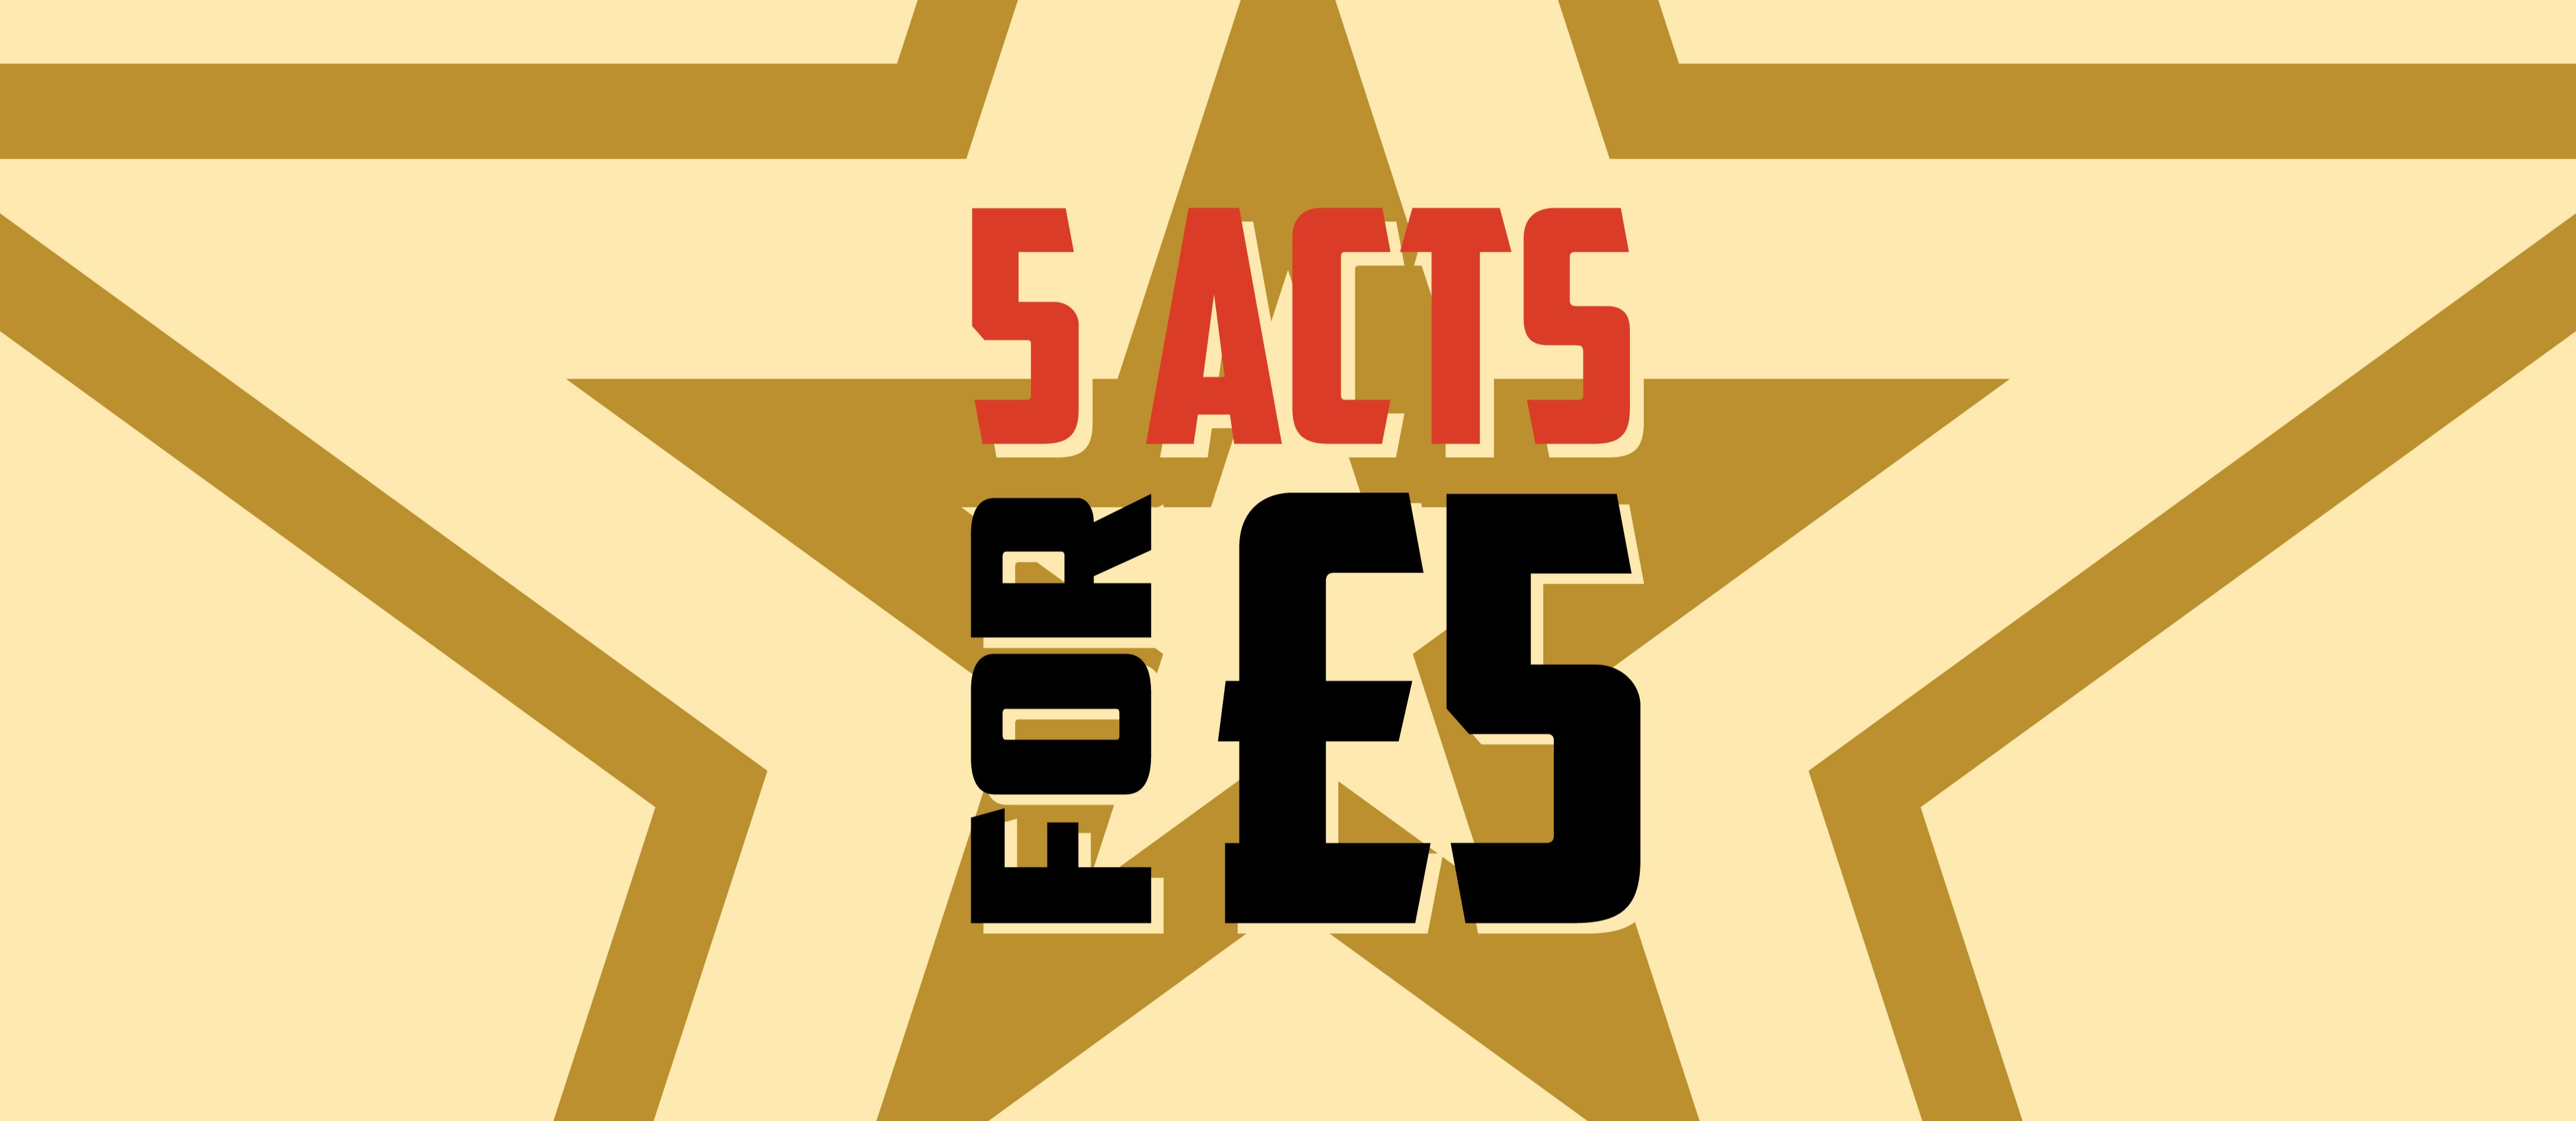 5 acts £5 - Leicester 